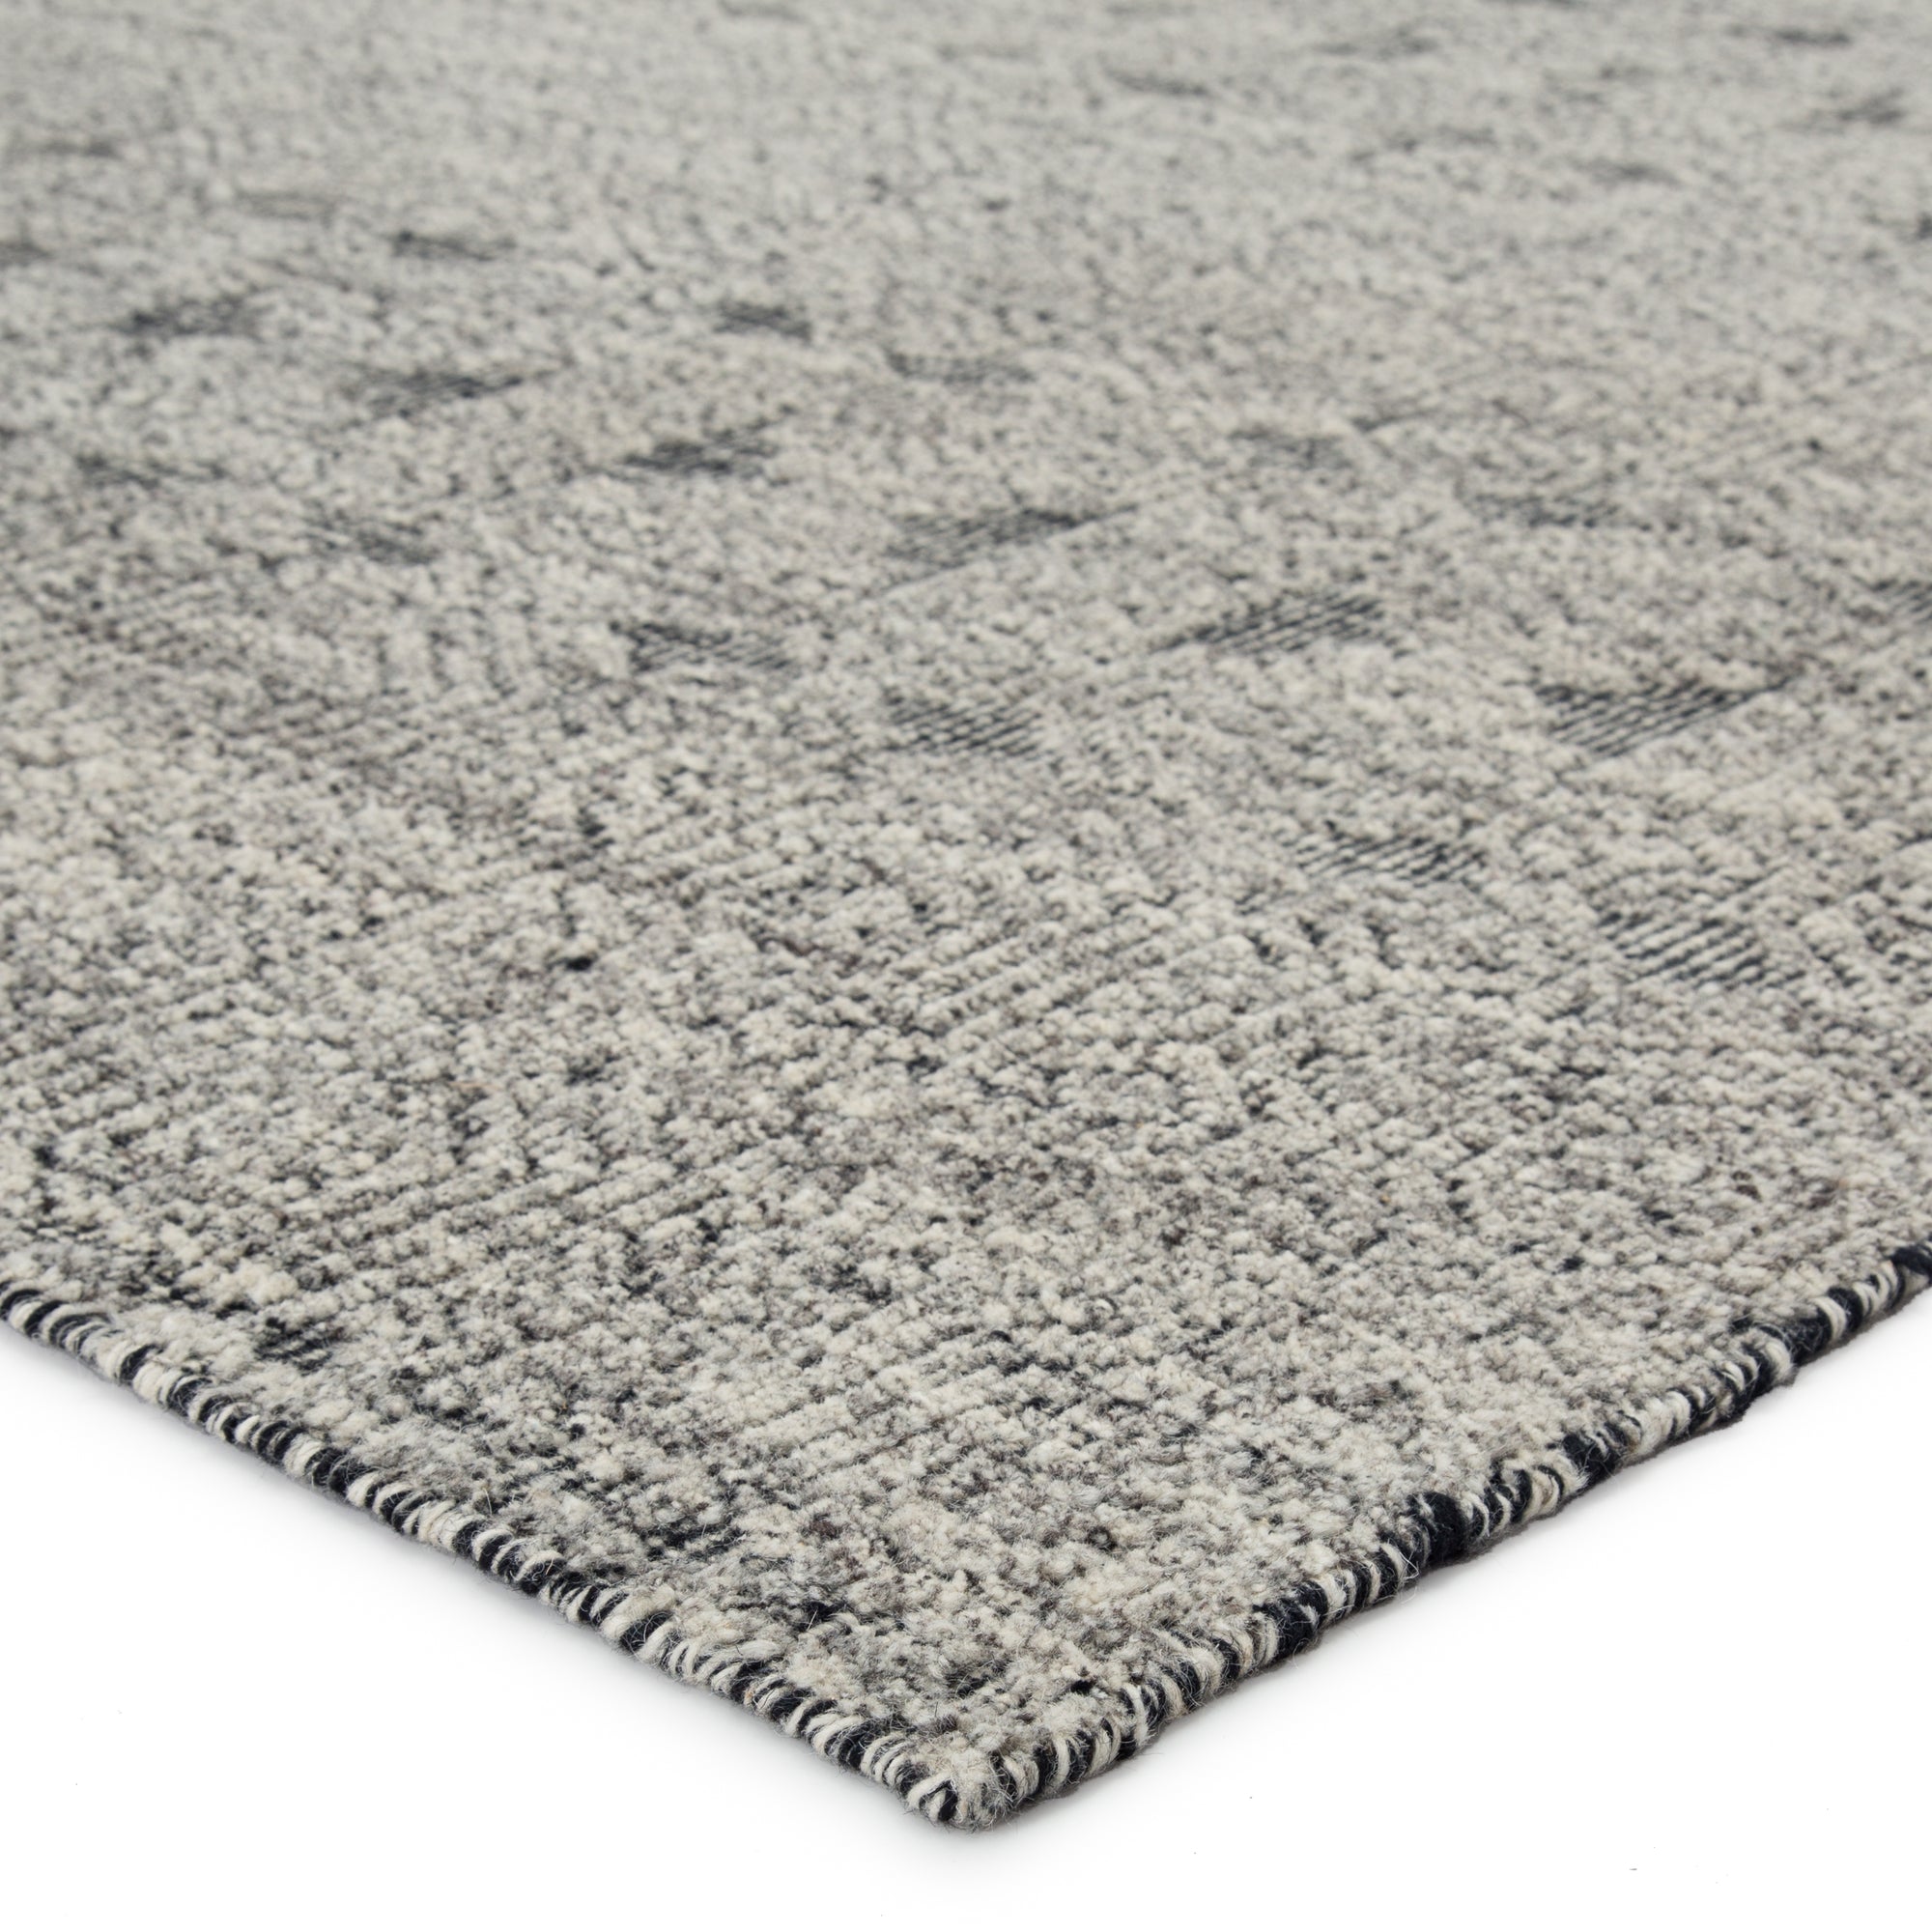 Rugs by Roo | Jaipur Living Abelle Hand-Knotted Tribal Gray Black Area Rug-RUG144750